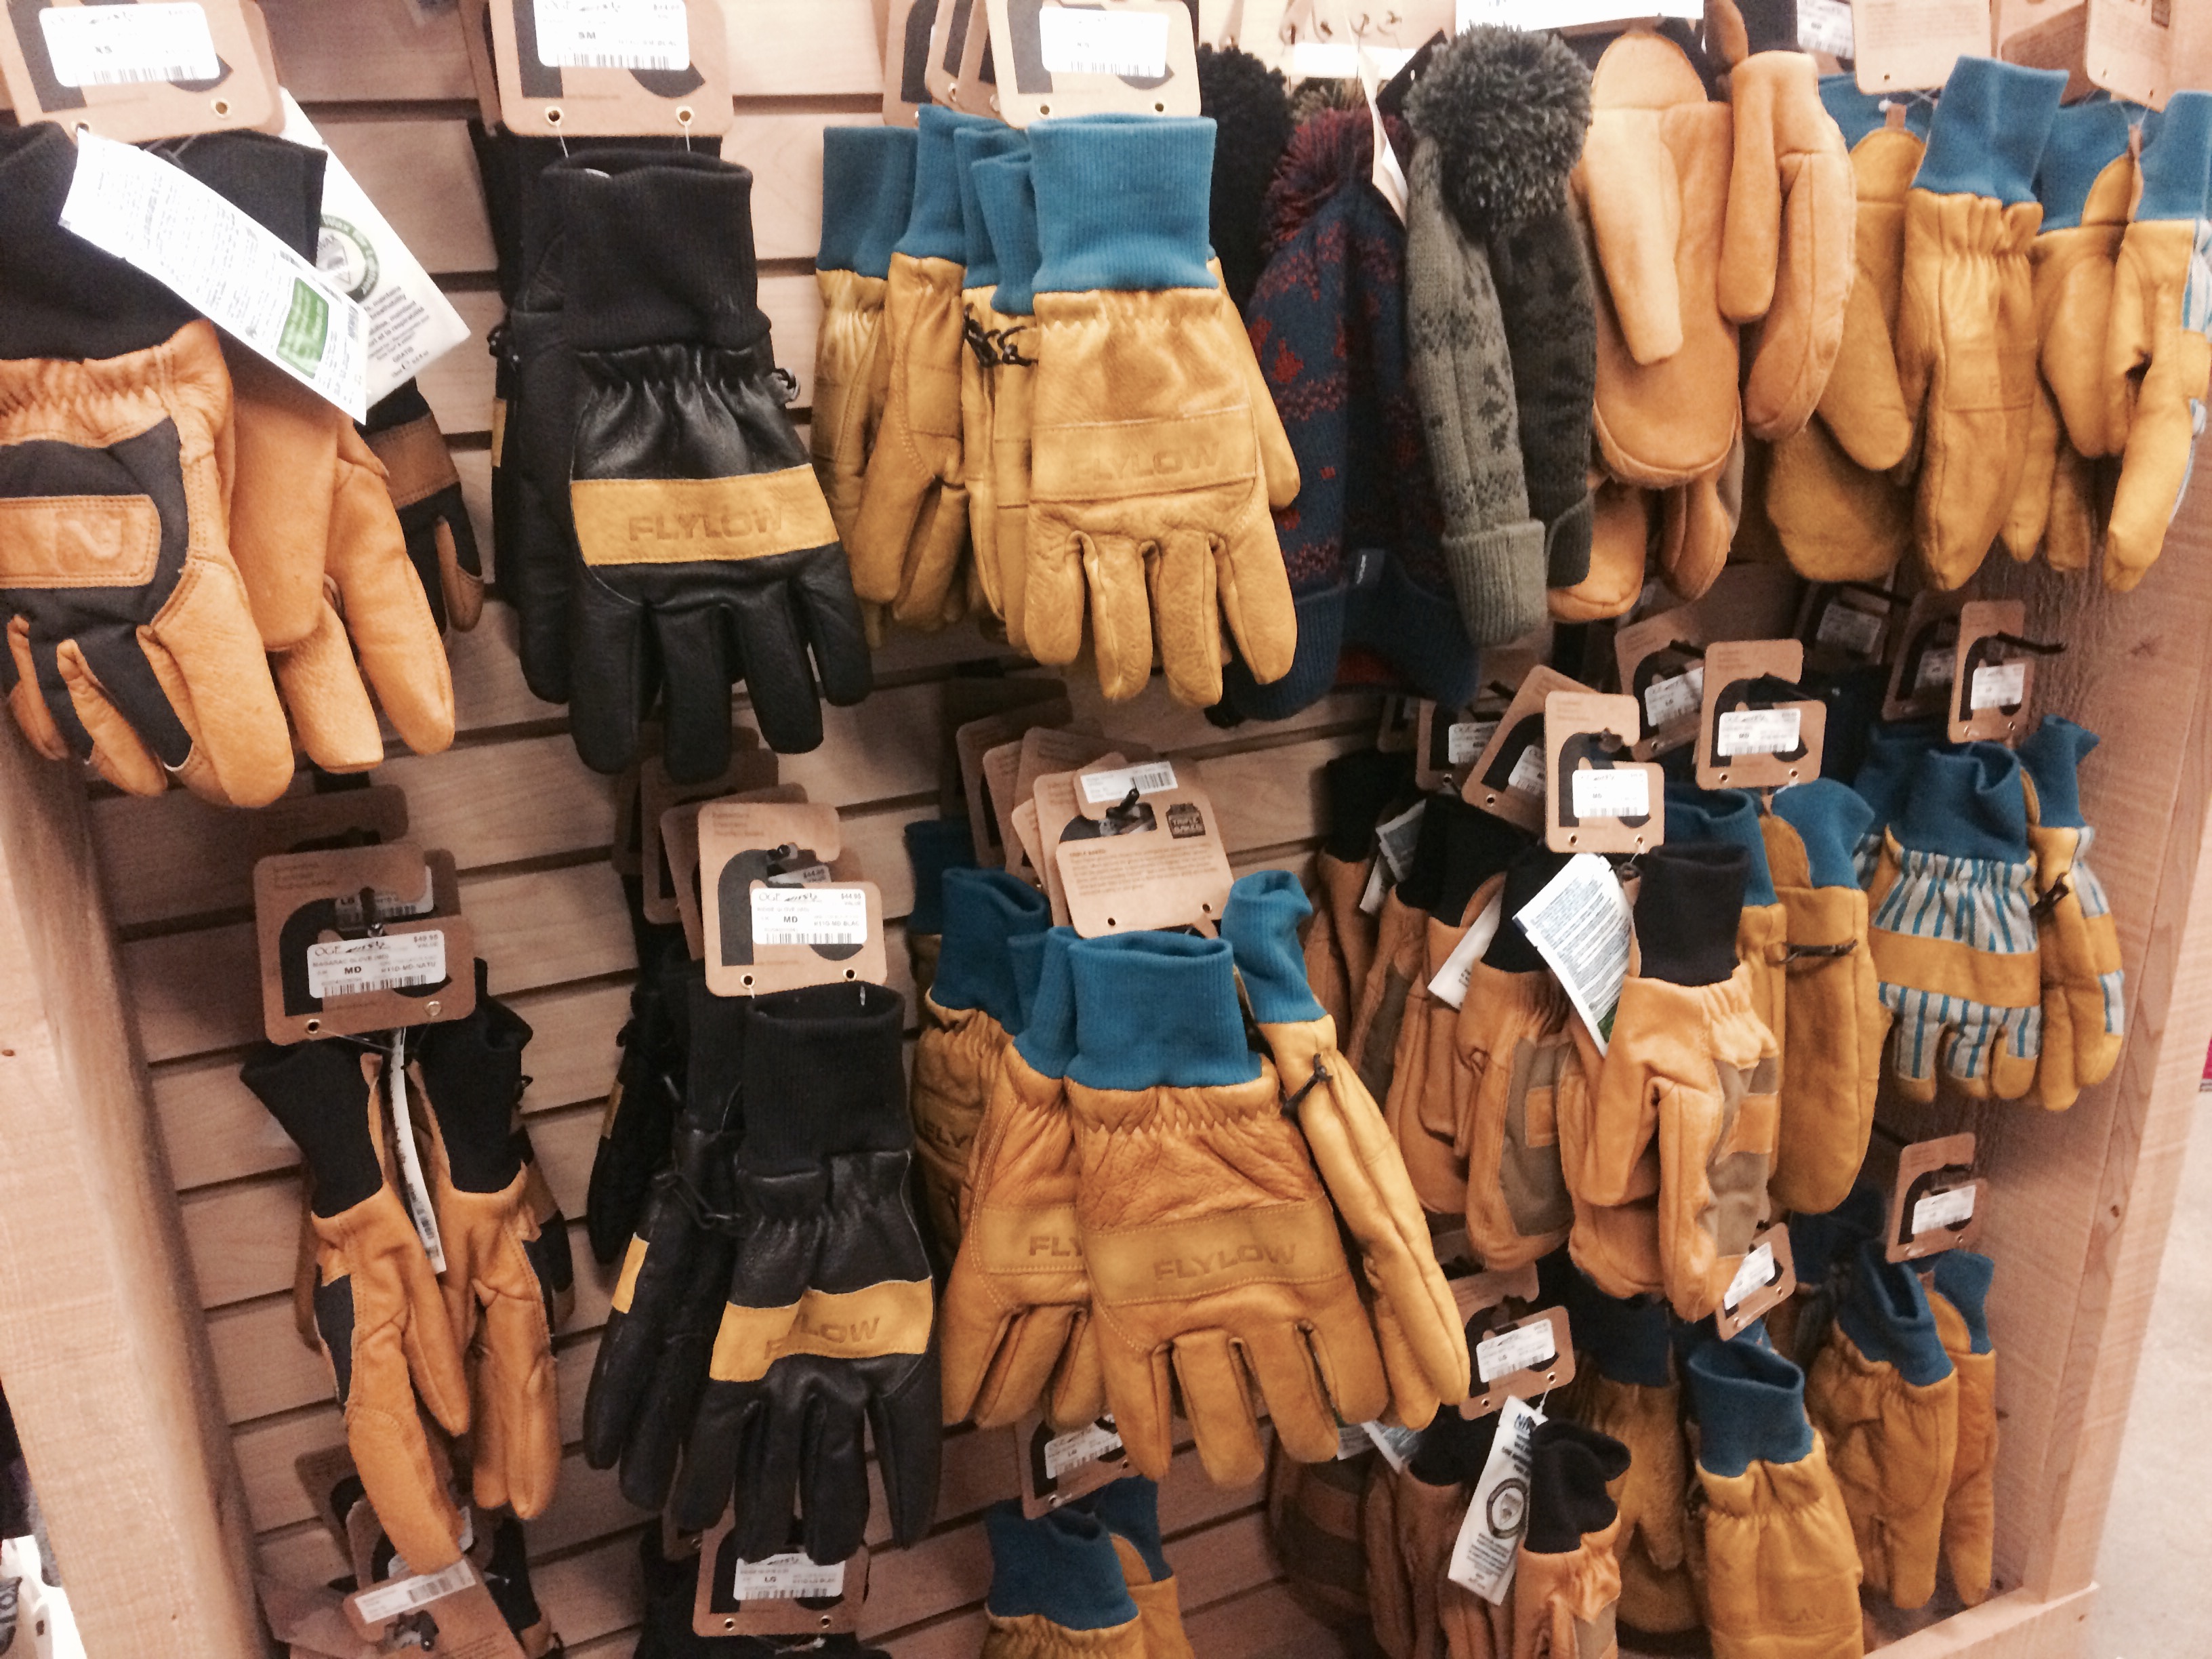 Gloves, gloves and more gloves. You can't have too many pairs when it comes to prep for a heli ski trip.